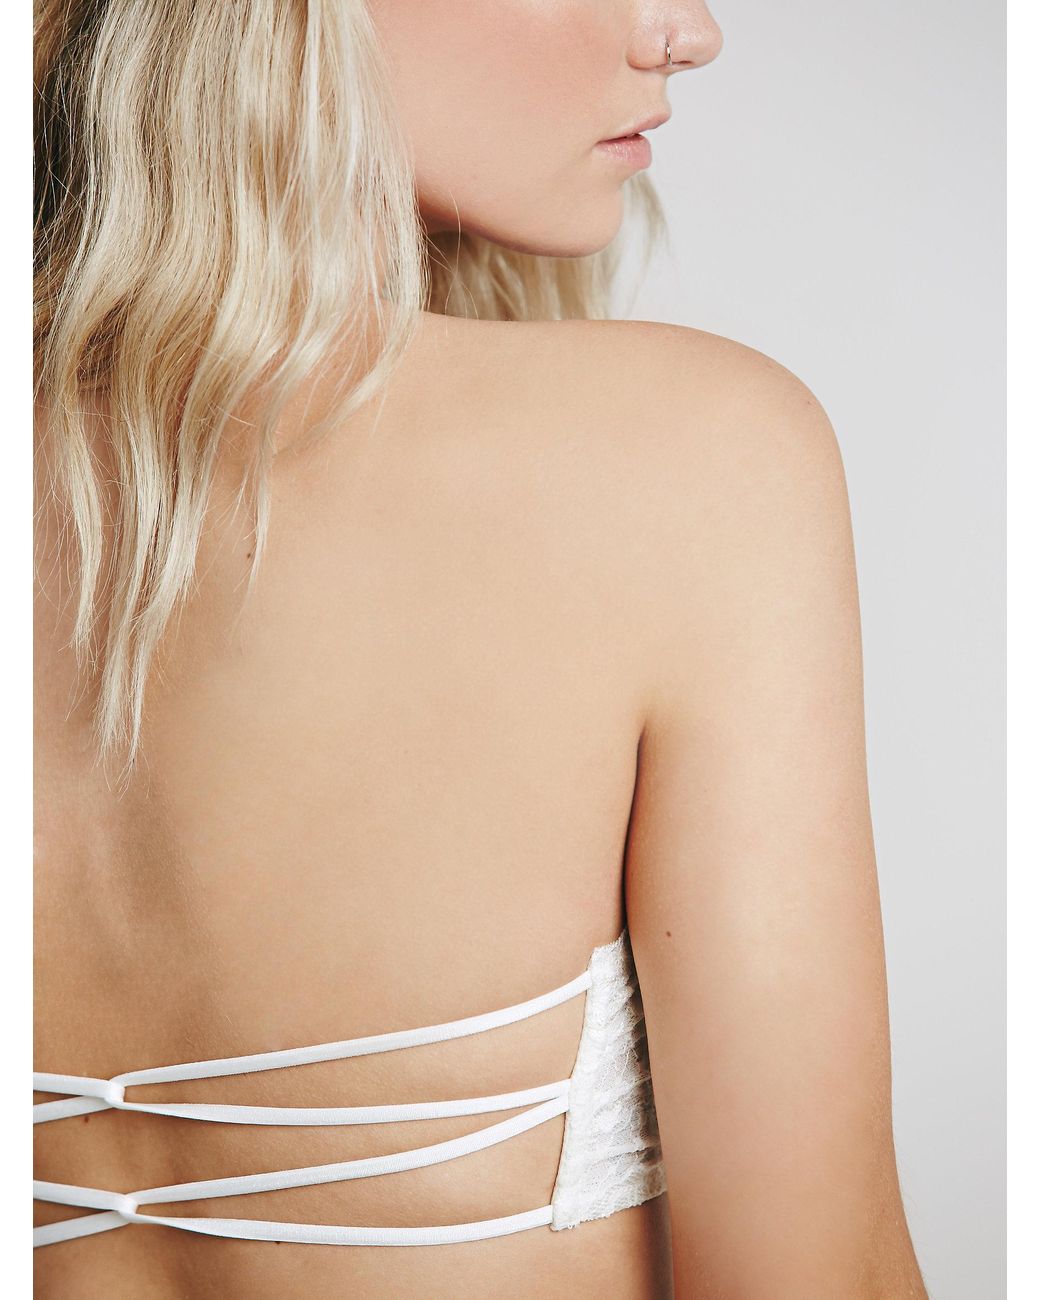 https://cdna.lystit.com/1040/1300/n/photos/freepeople/69045e28/free-people-White-Essential-Lace-Bandeau.jpeg